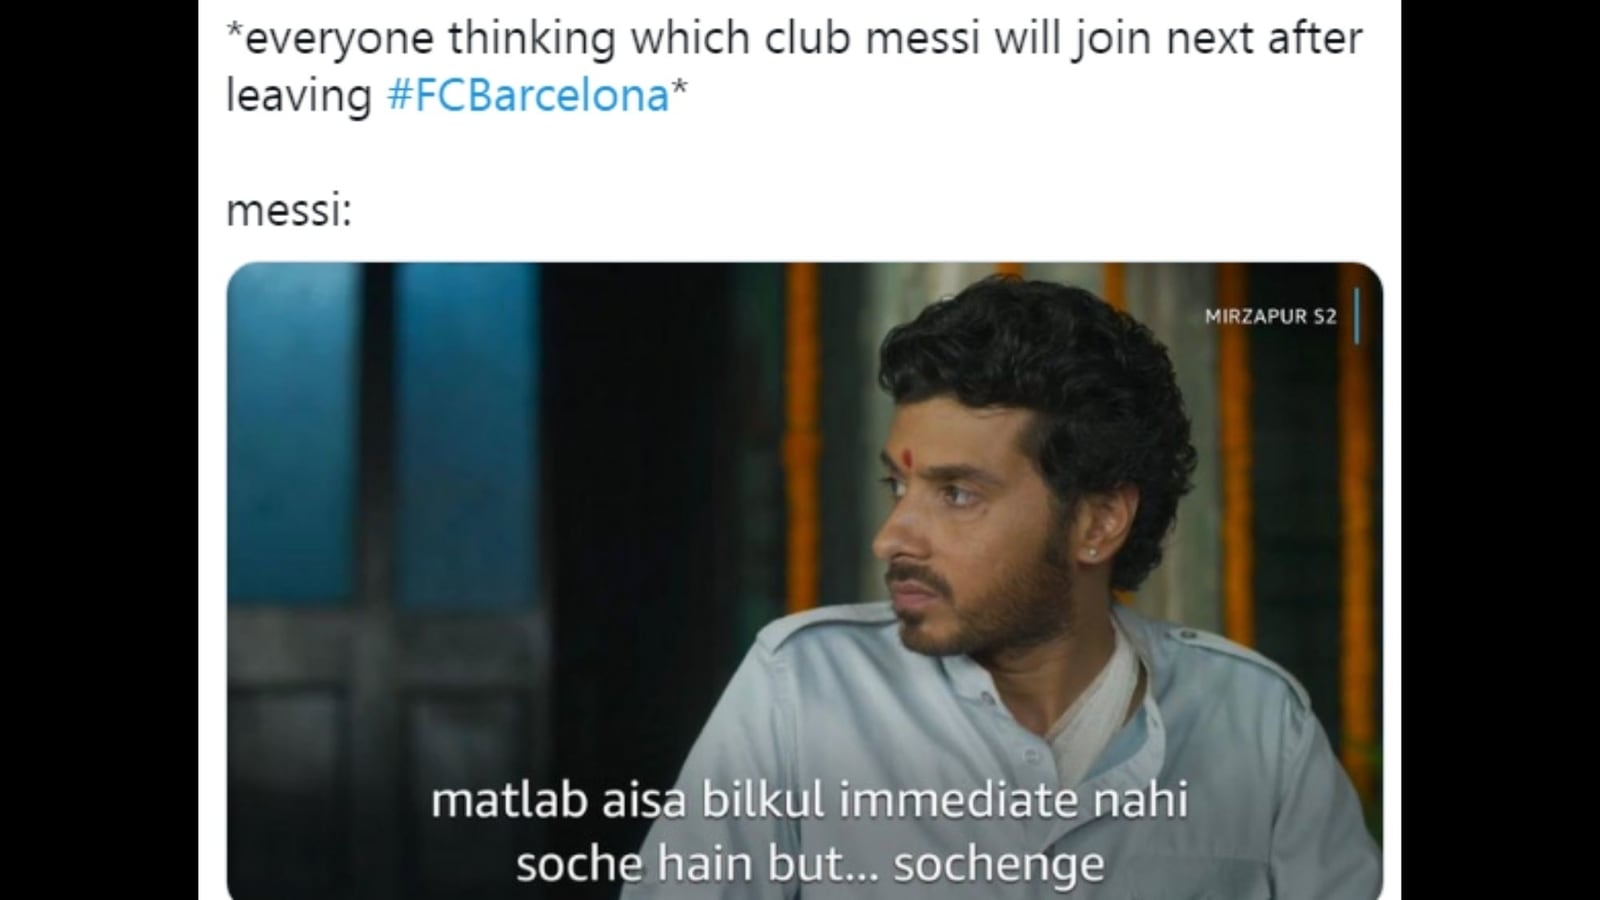 Lionel Messi leaves FC Barcelona, people react with meme ...